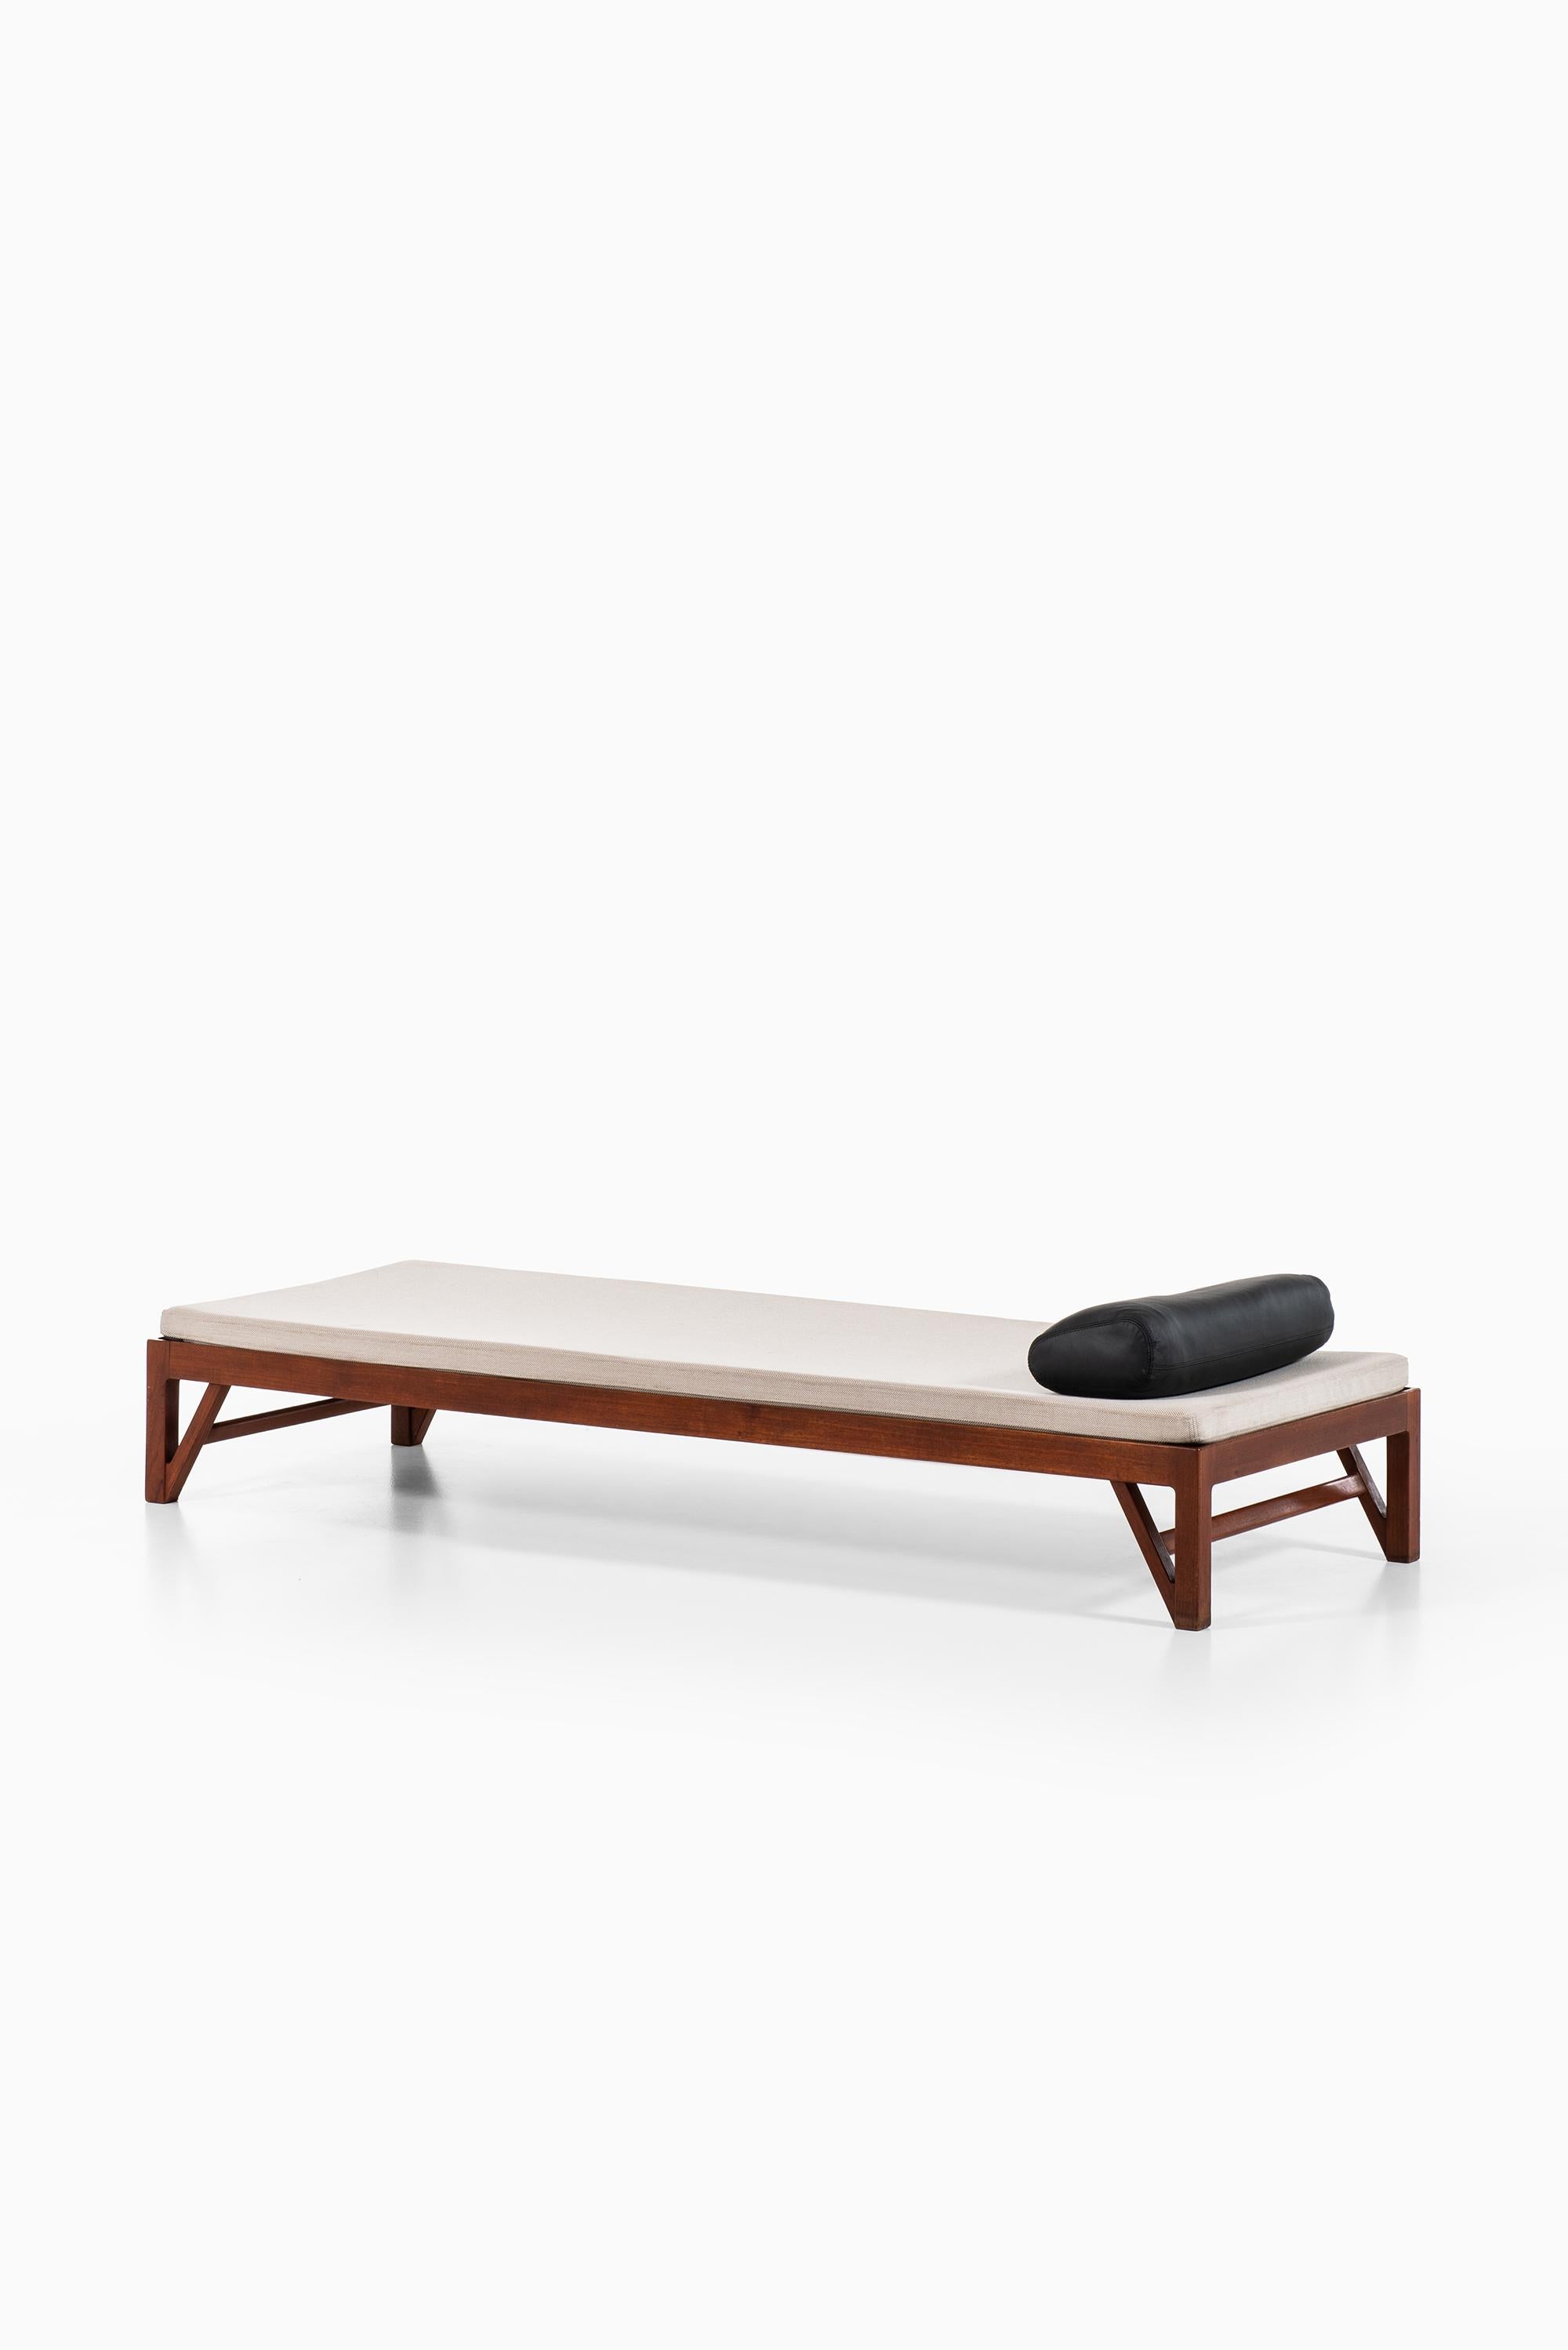 Mid-20th Century Daybed with V-Shaped Legs in Teak Produced in Denmark 